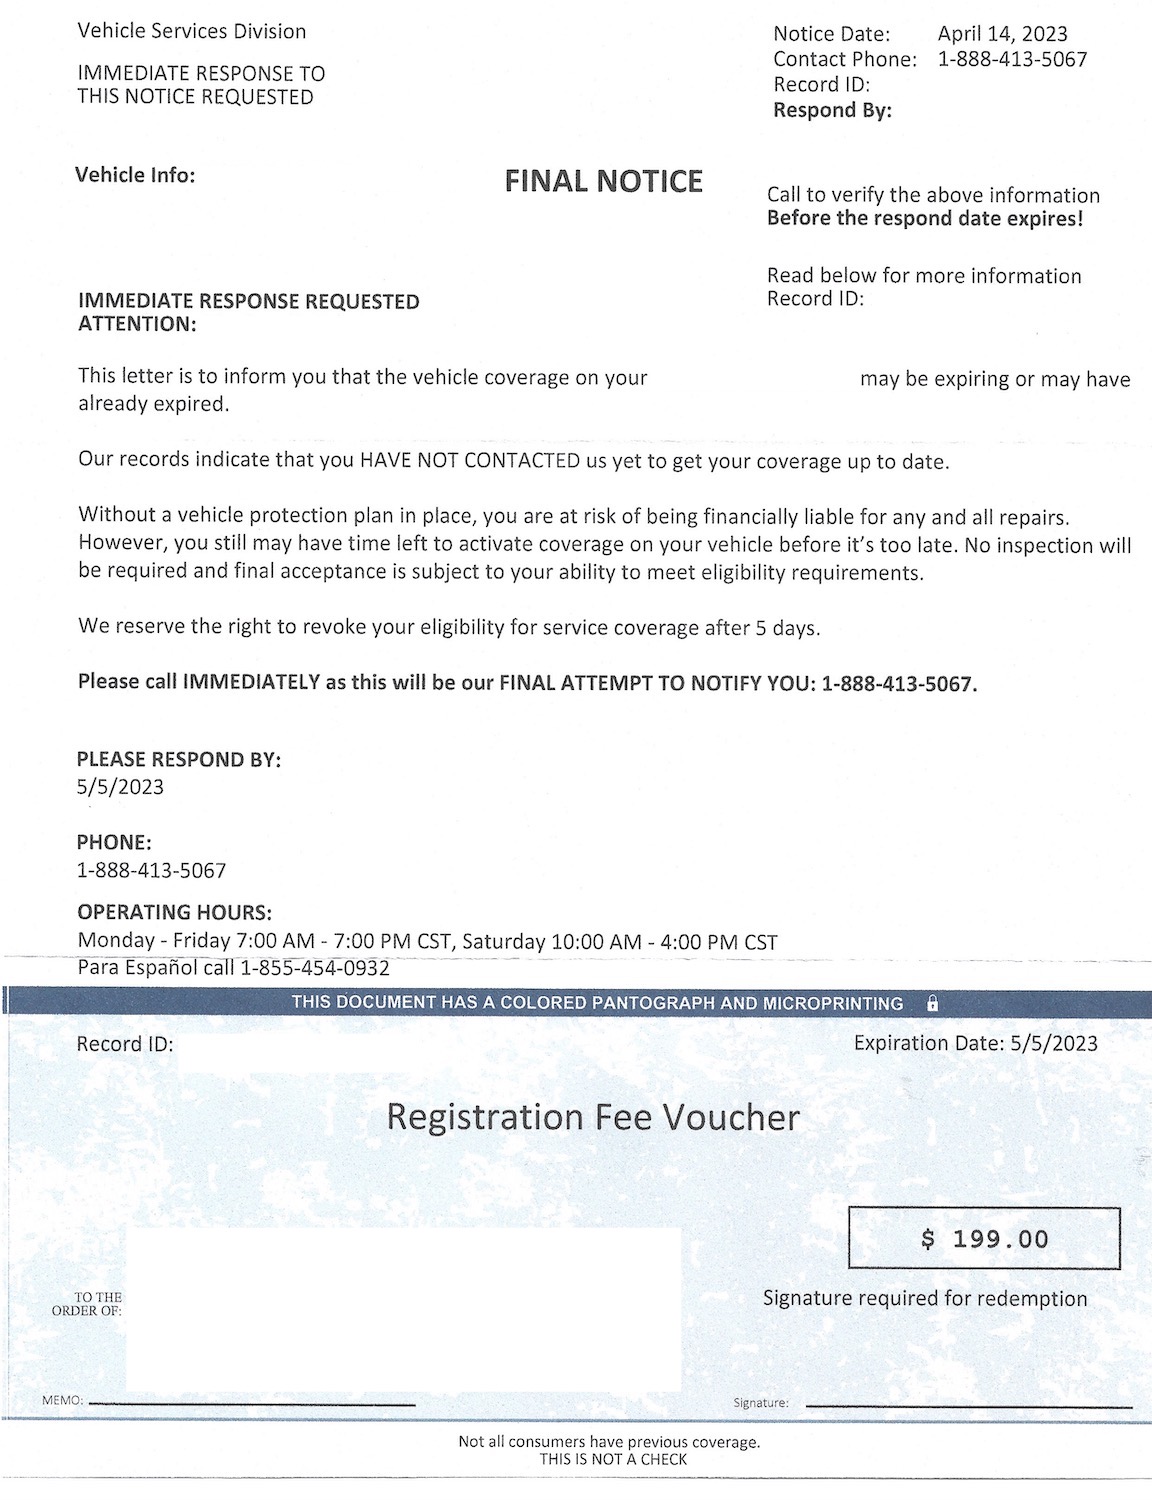 Vehicle Services Division Scam Mailer 2